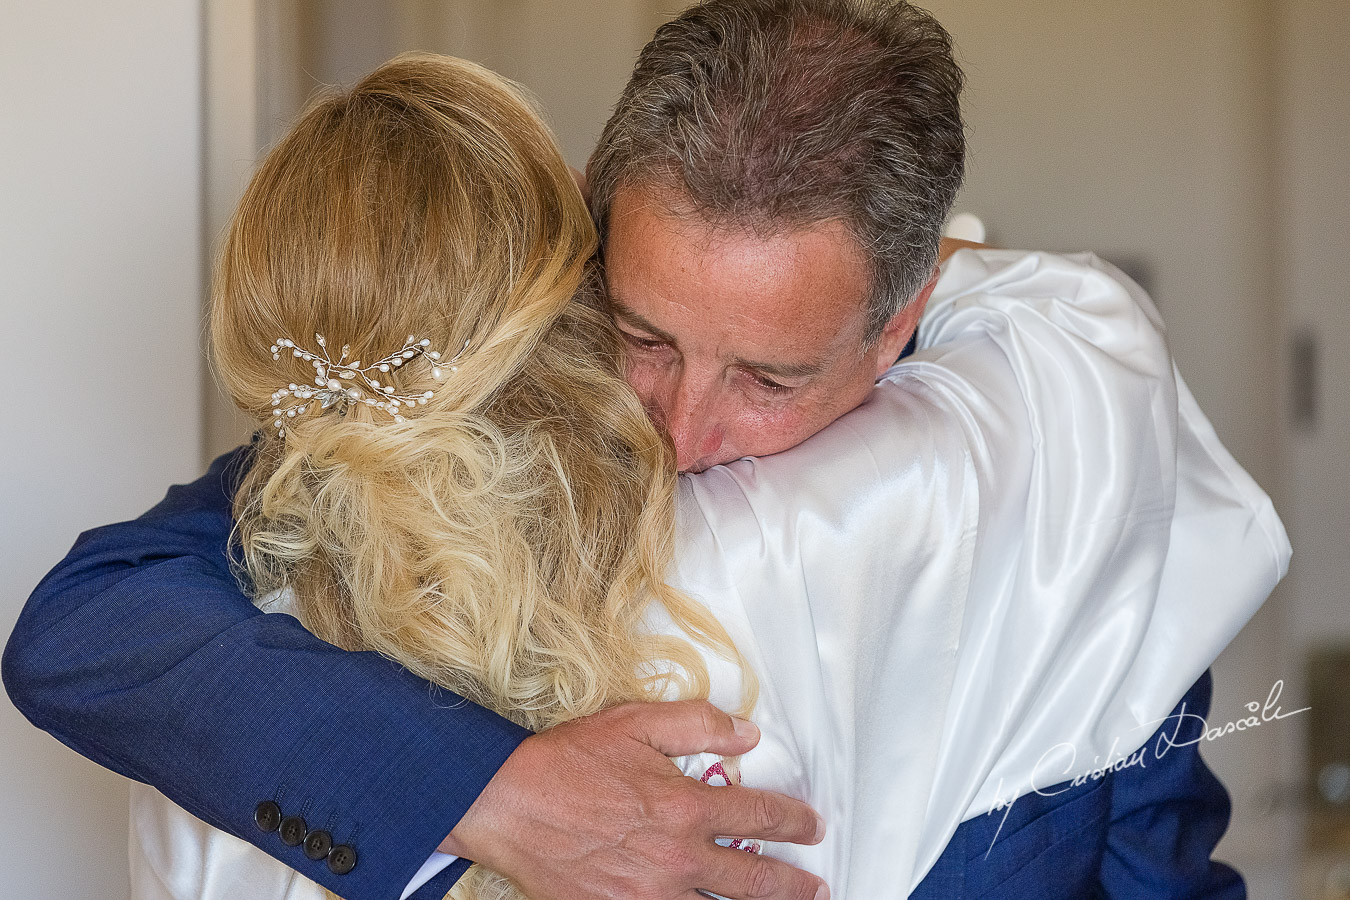 Emotional moments with the father of the Bride captured at Aphrodite Hills by wedding photographer Cristian Dascalu.